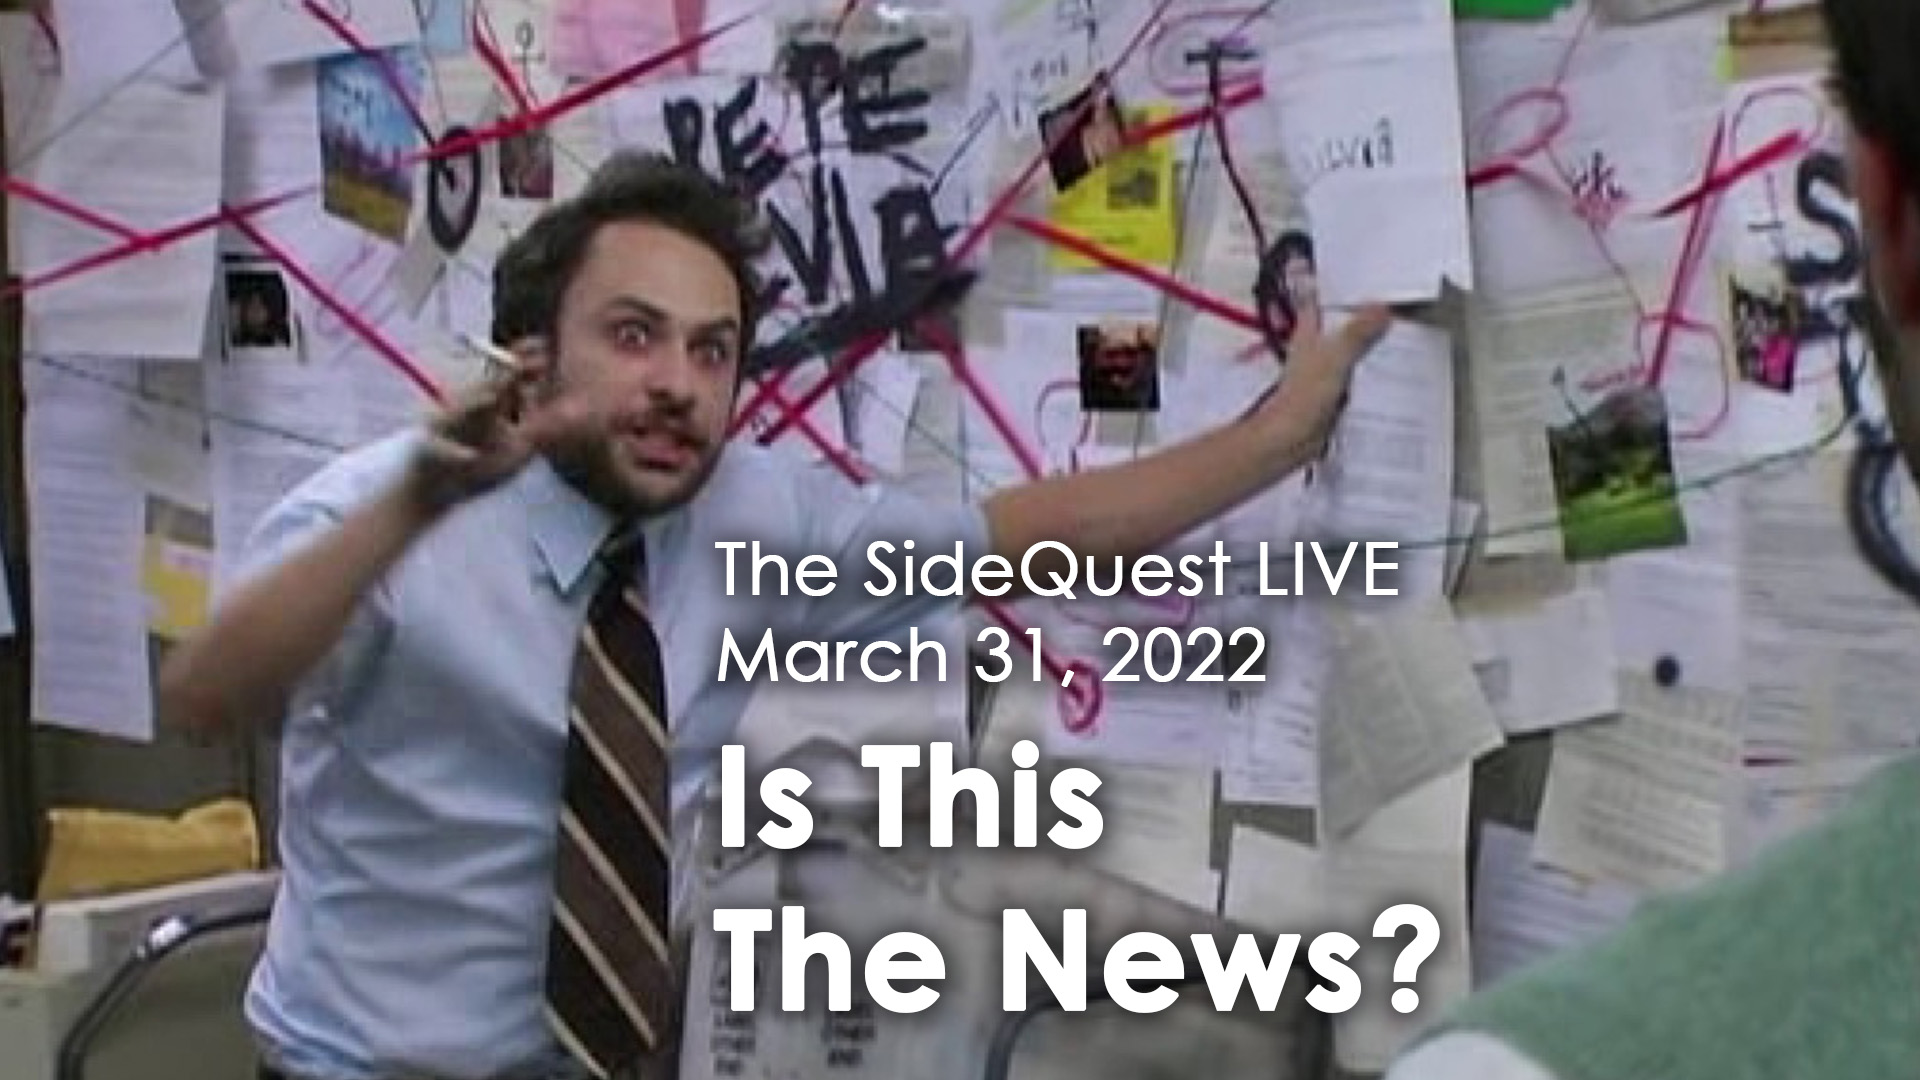 The SideQuest LIVE March 31, 2022: Is This The News?